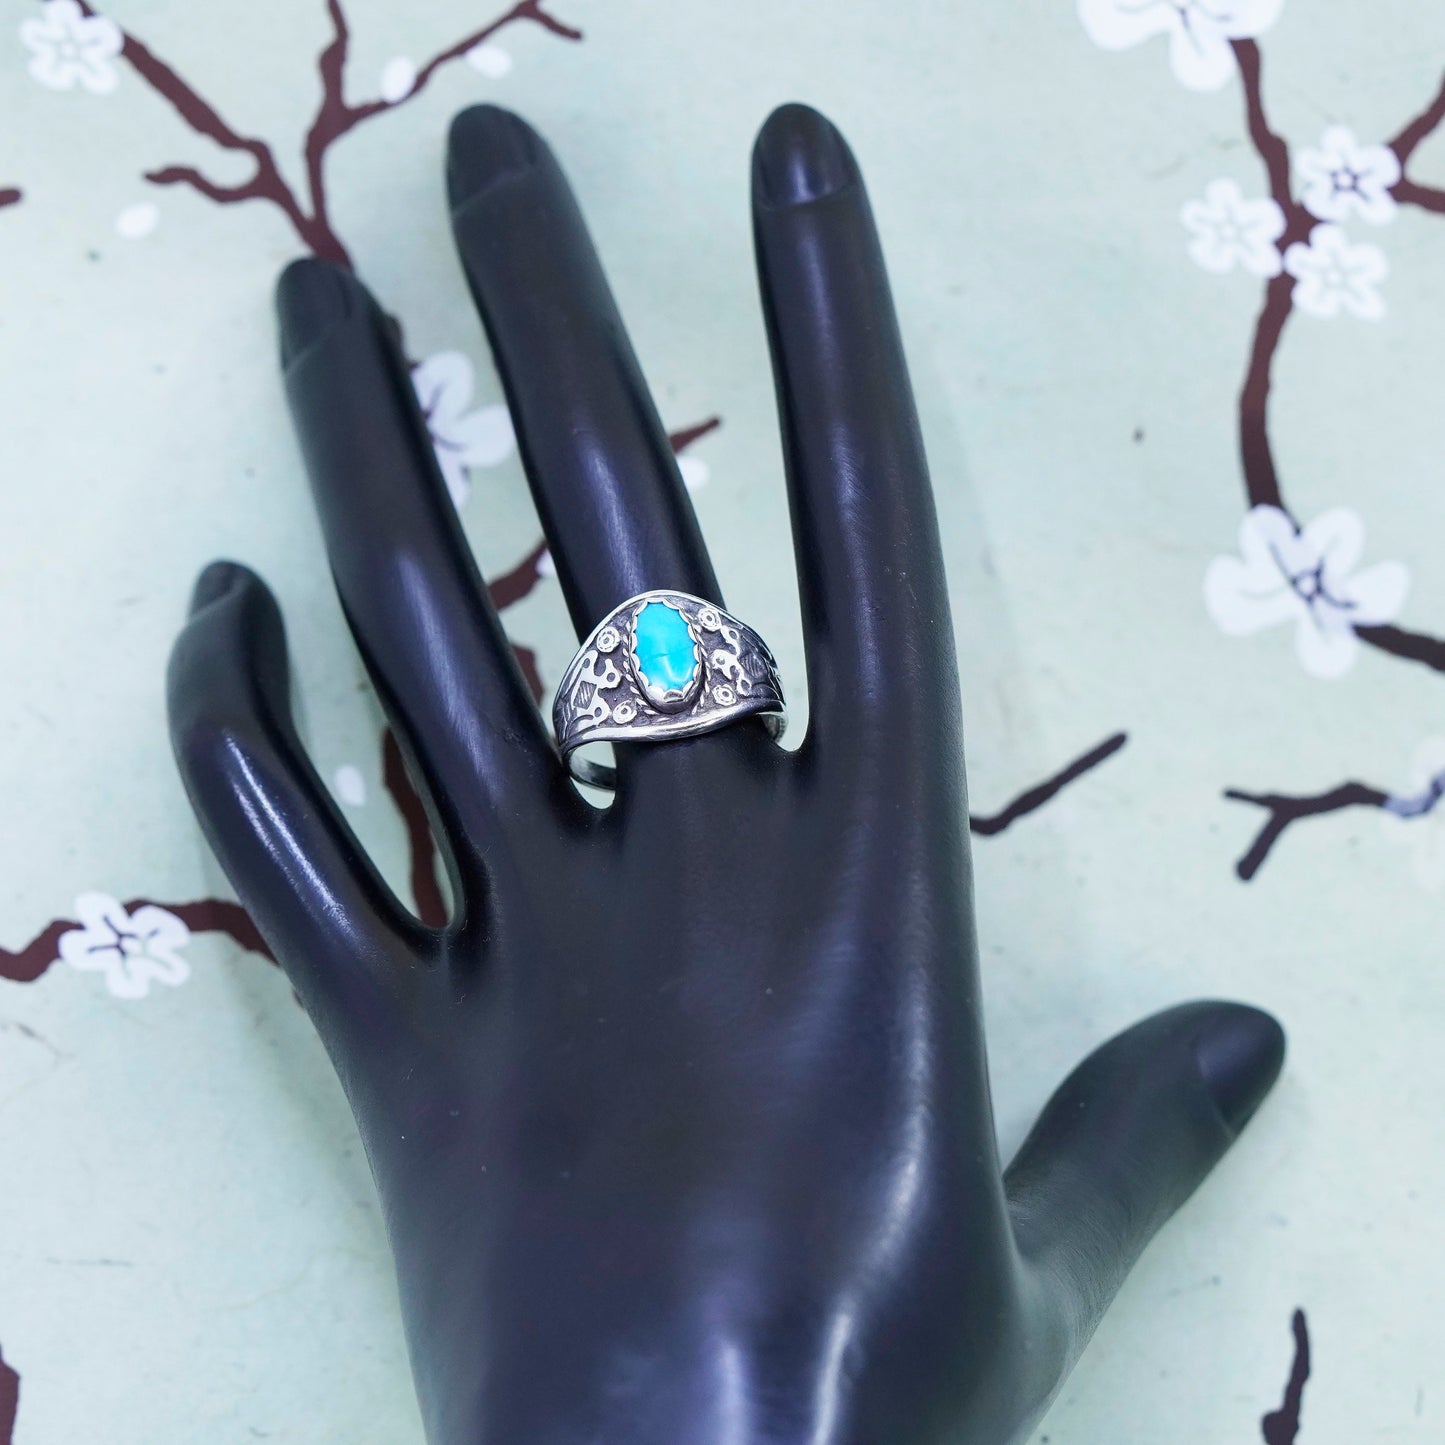 Size 9.5, Native American sterling silver ring, 925 band turquoise thunderbird